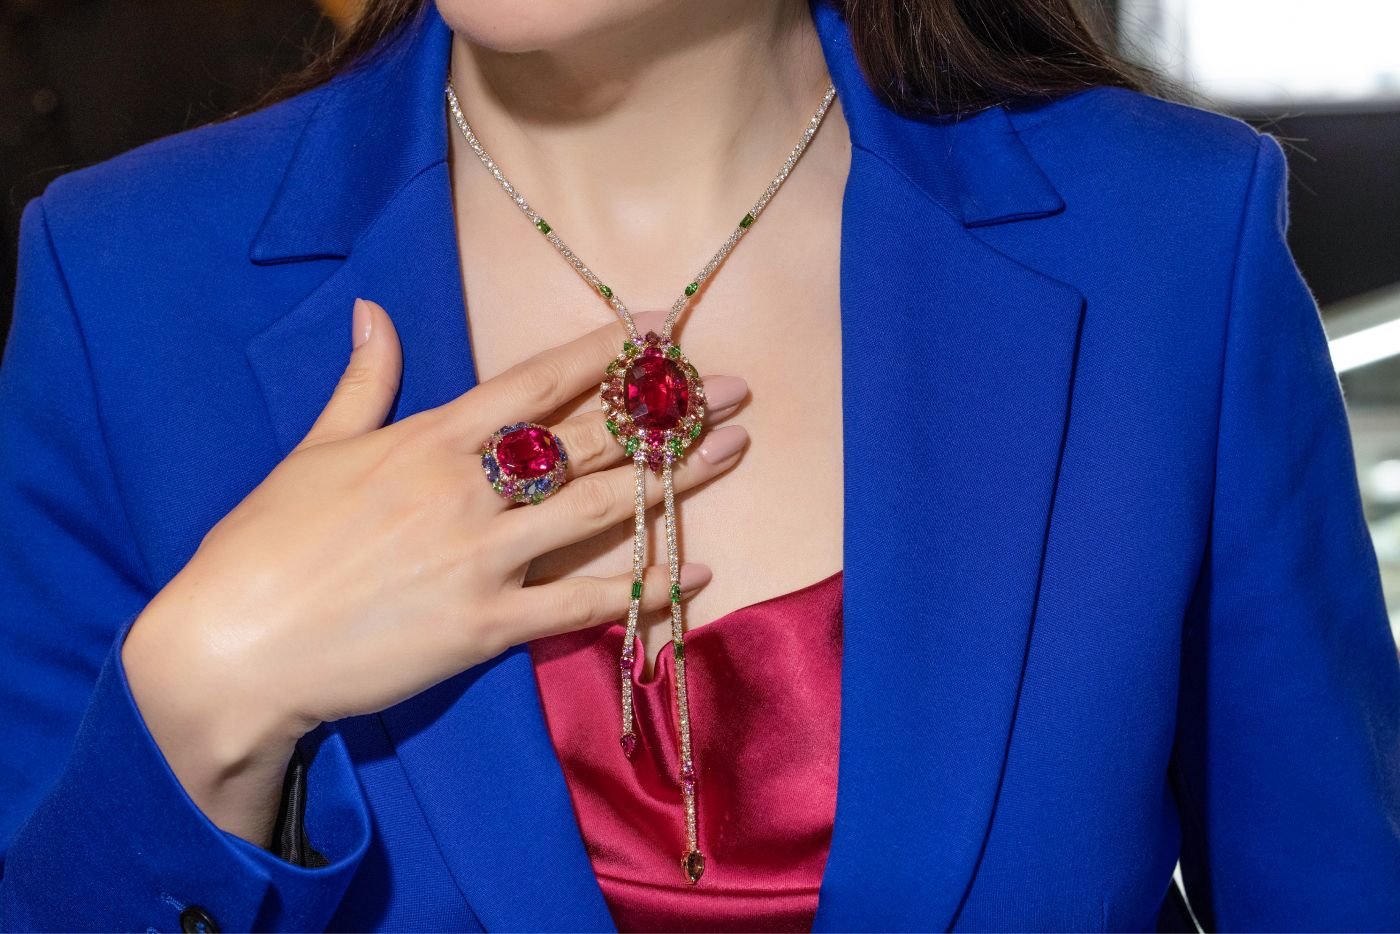 Katerina Perez wearing a Sofragem High Jewellery necklace and cocktail ring featuring a 37-ct rubellite, diamonds, green and pink tourmalines, pink sapphires and tsavorites